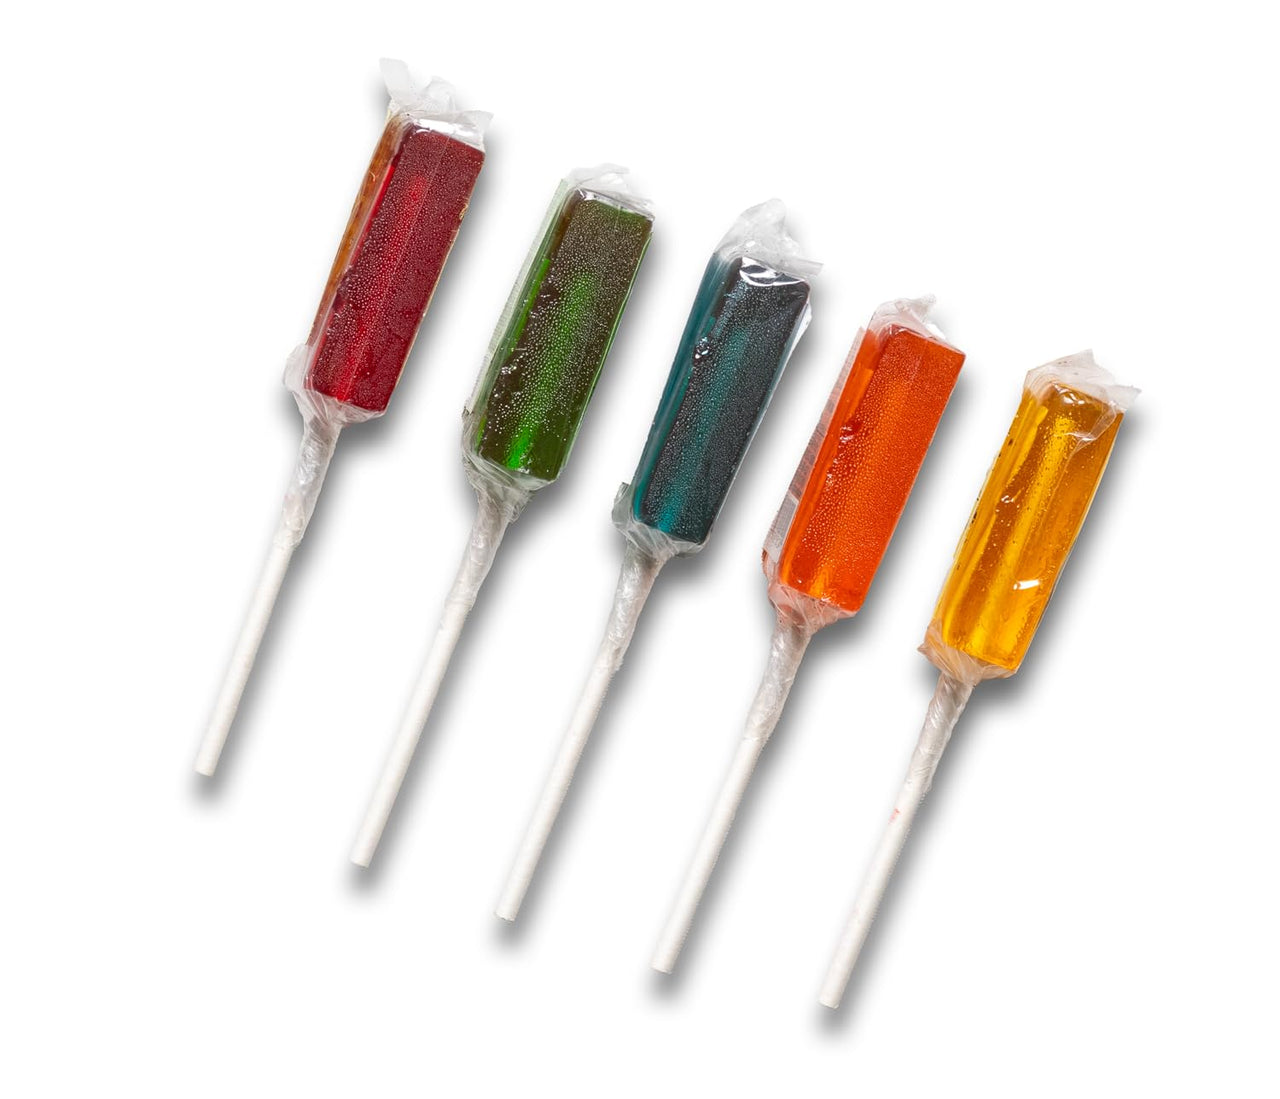 Lollipops Assorted Flavors - Five Pack of 1 oz Prickly Pear Lollipops - Prickly Pear, Blueberry, Watermelon Orange and Lemon, made by Cactus Candy Company, (5 Pack)